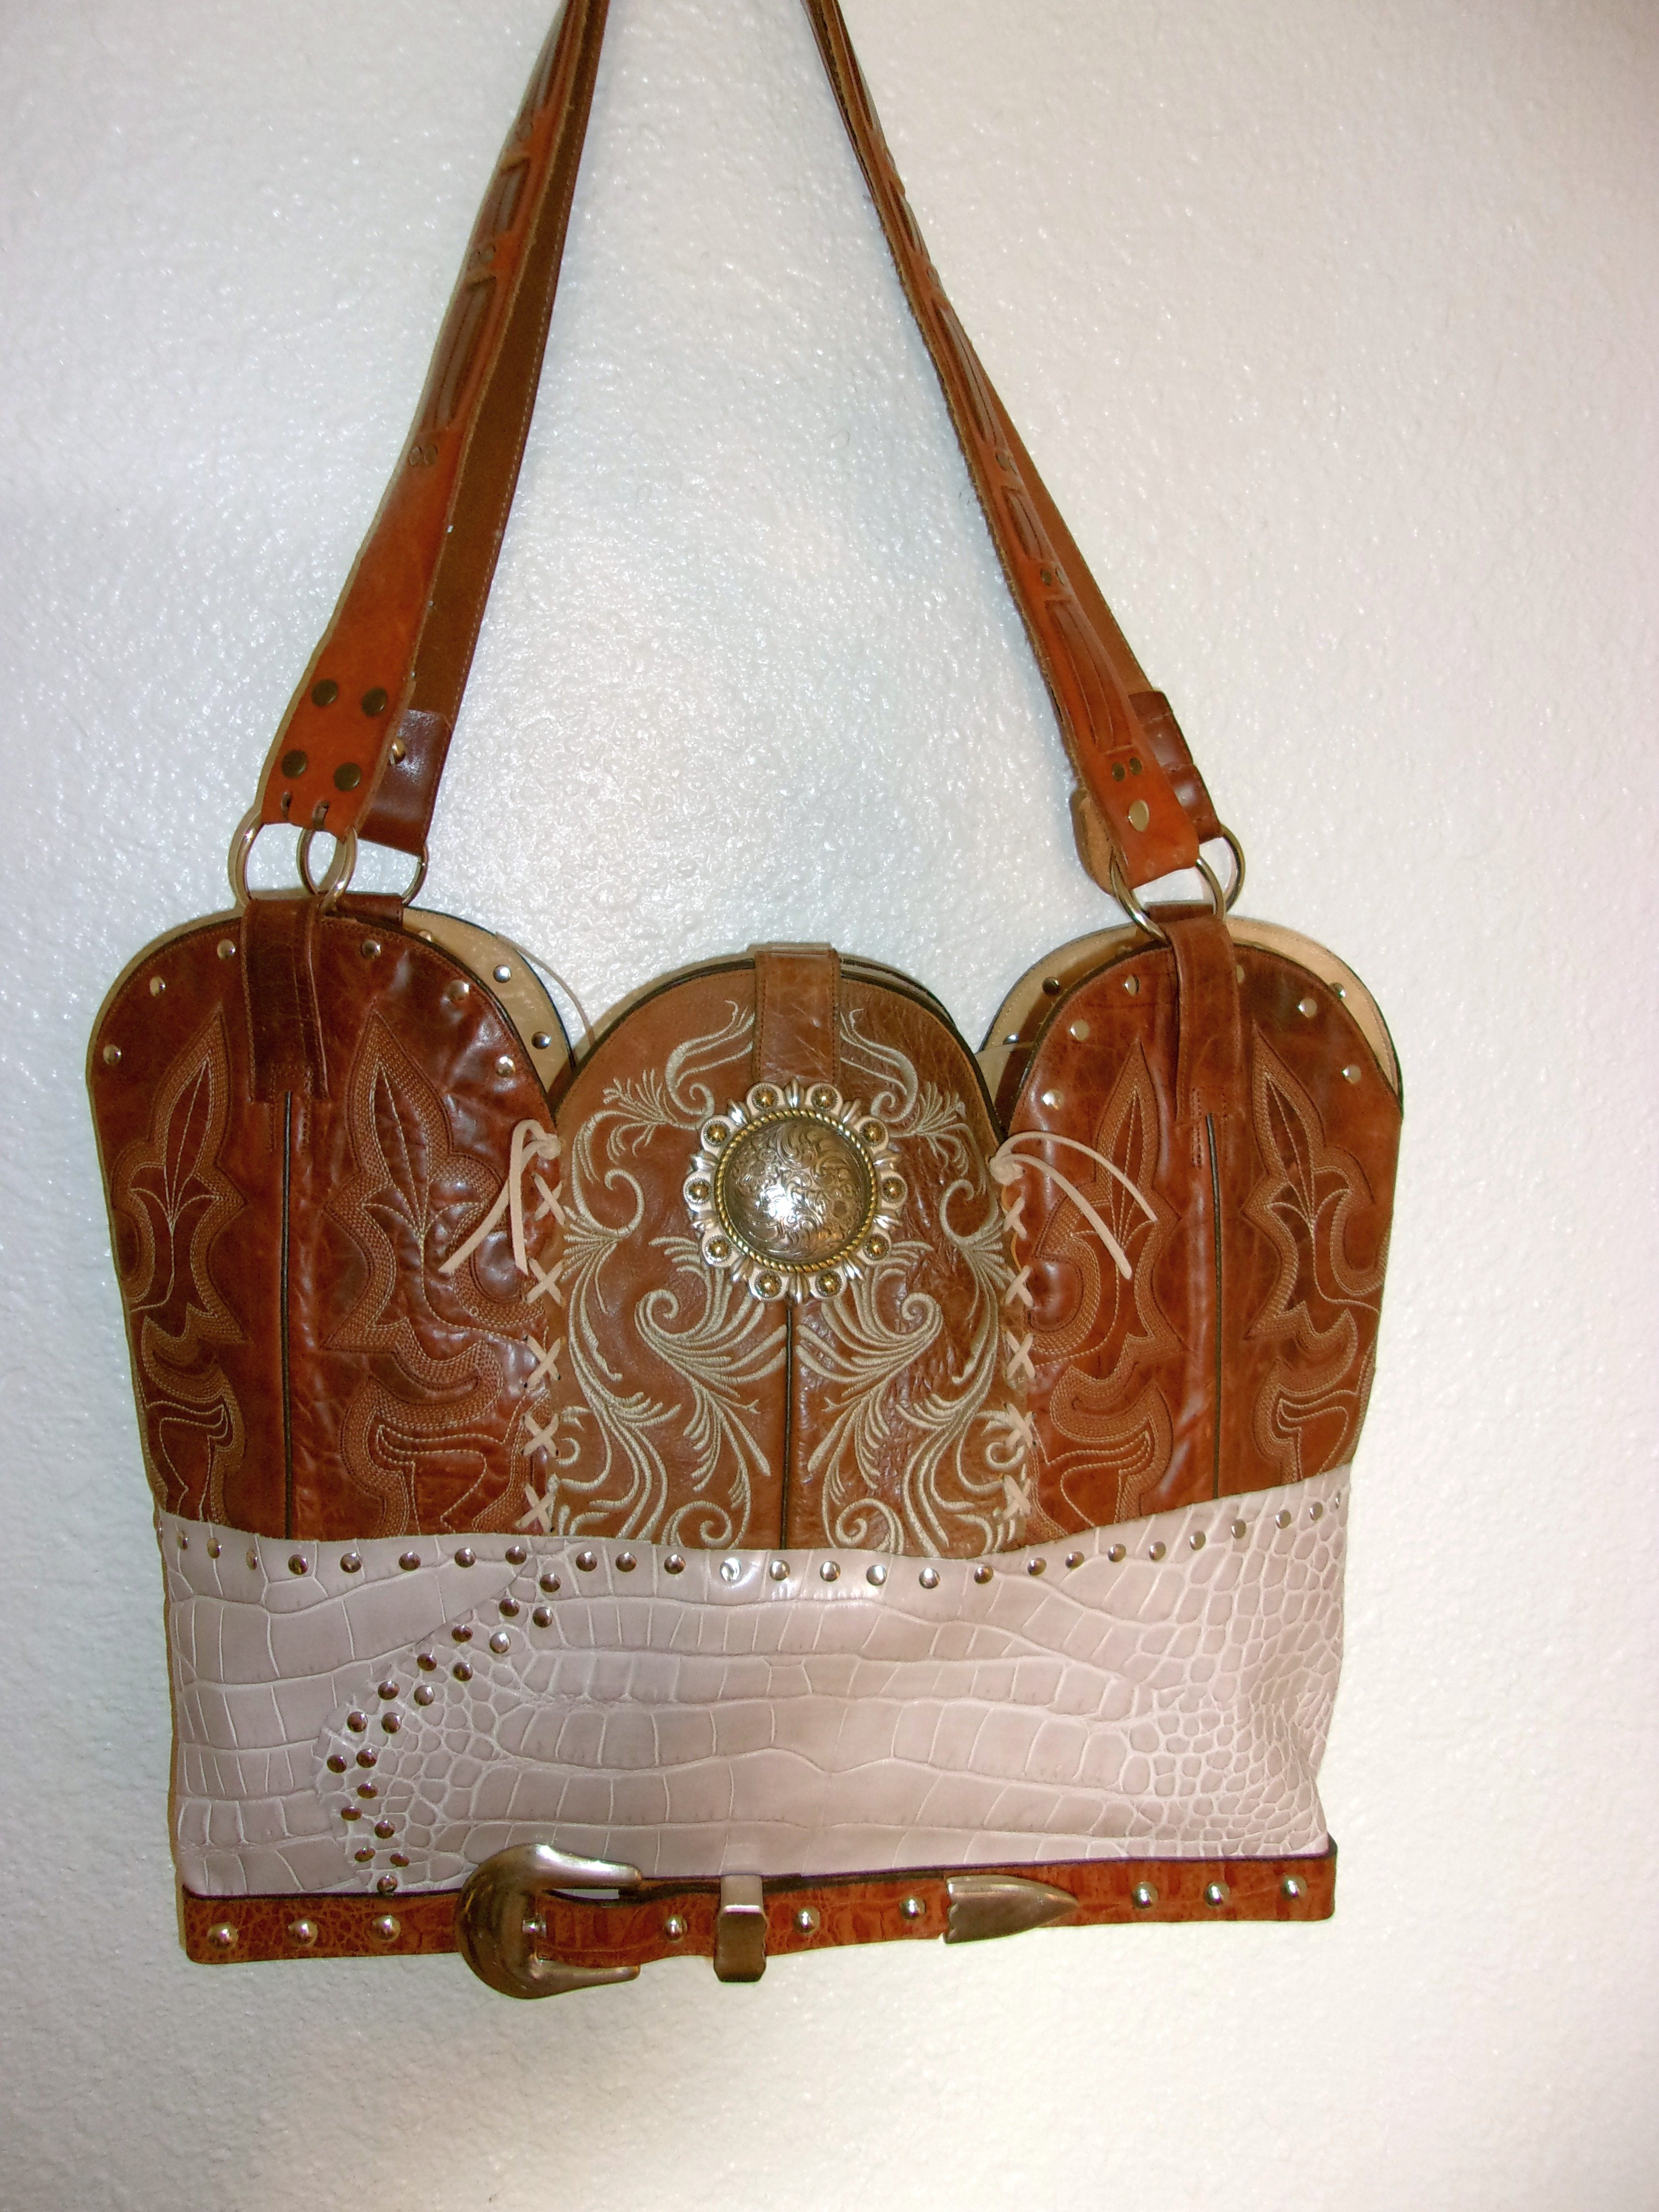 Western Laptop Tote - Extra Large Cowboy Boot Purse - Western Travel Bag LT25 cowboy boot purses, western fringe purse, handmade leather purses, boot purse, handmade western purse, custom leather handbags Chris Thompson Bags